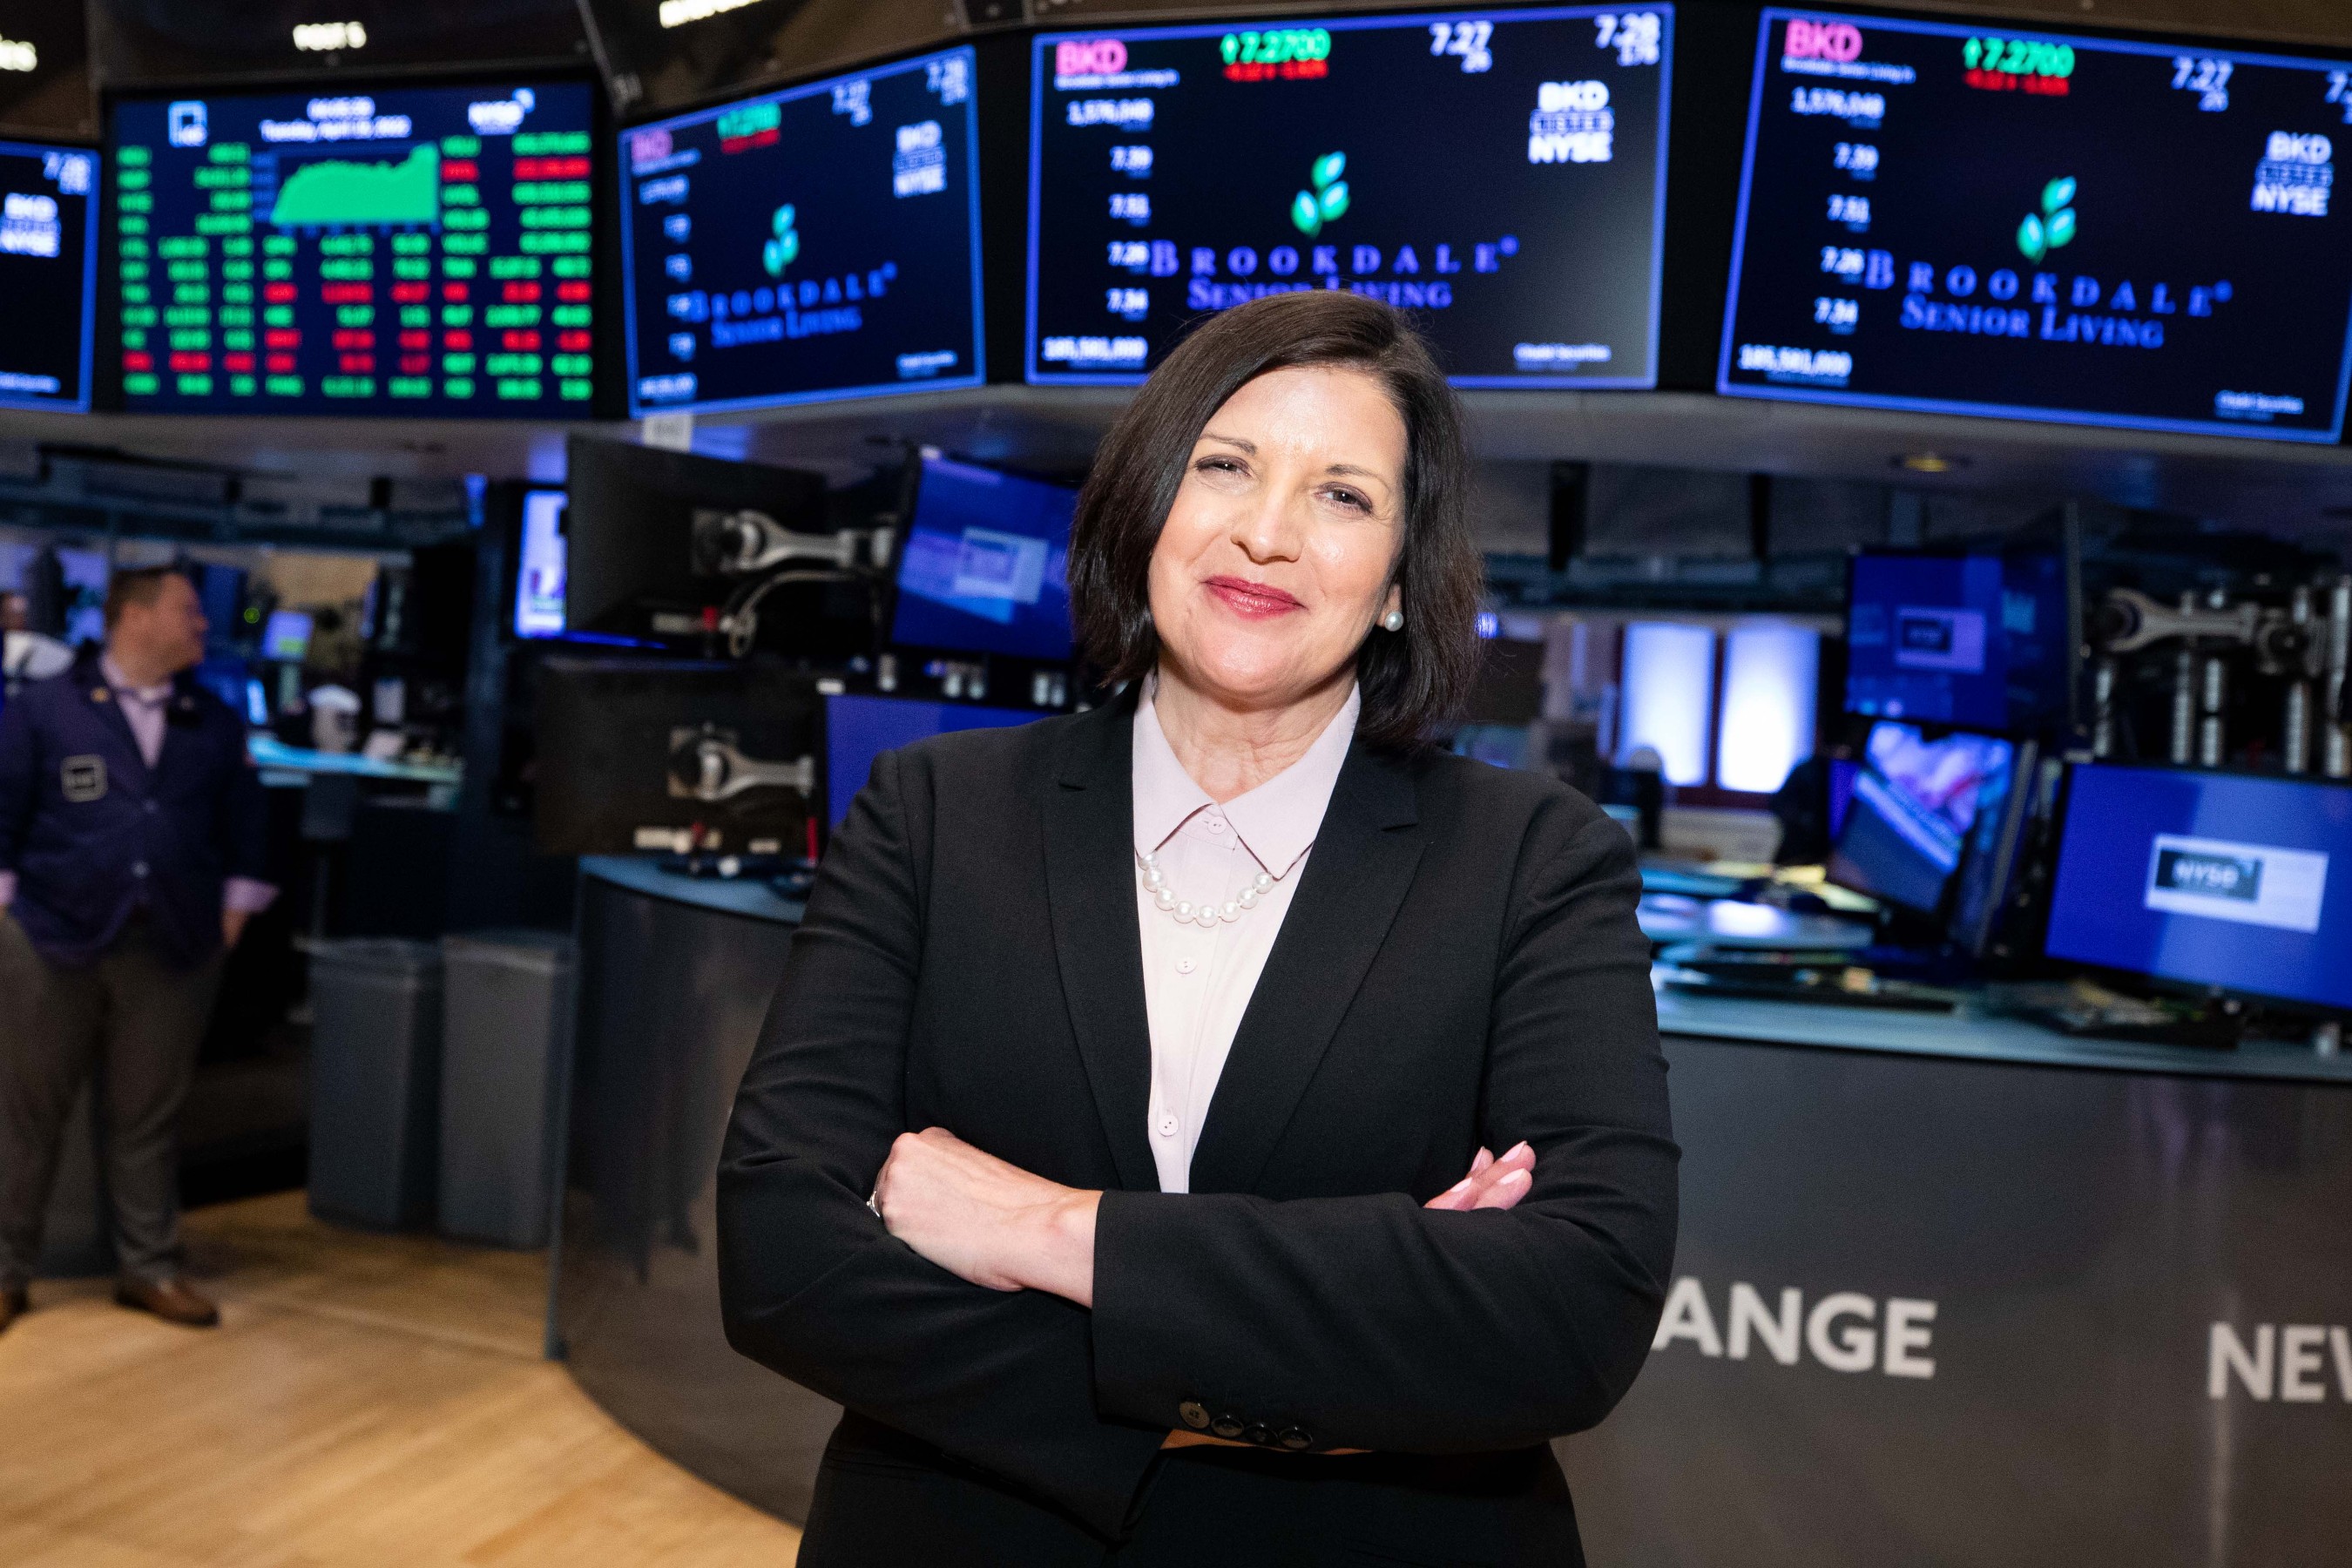 On April 19, Baier was invited to ring the closing bell at the NYSE.